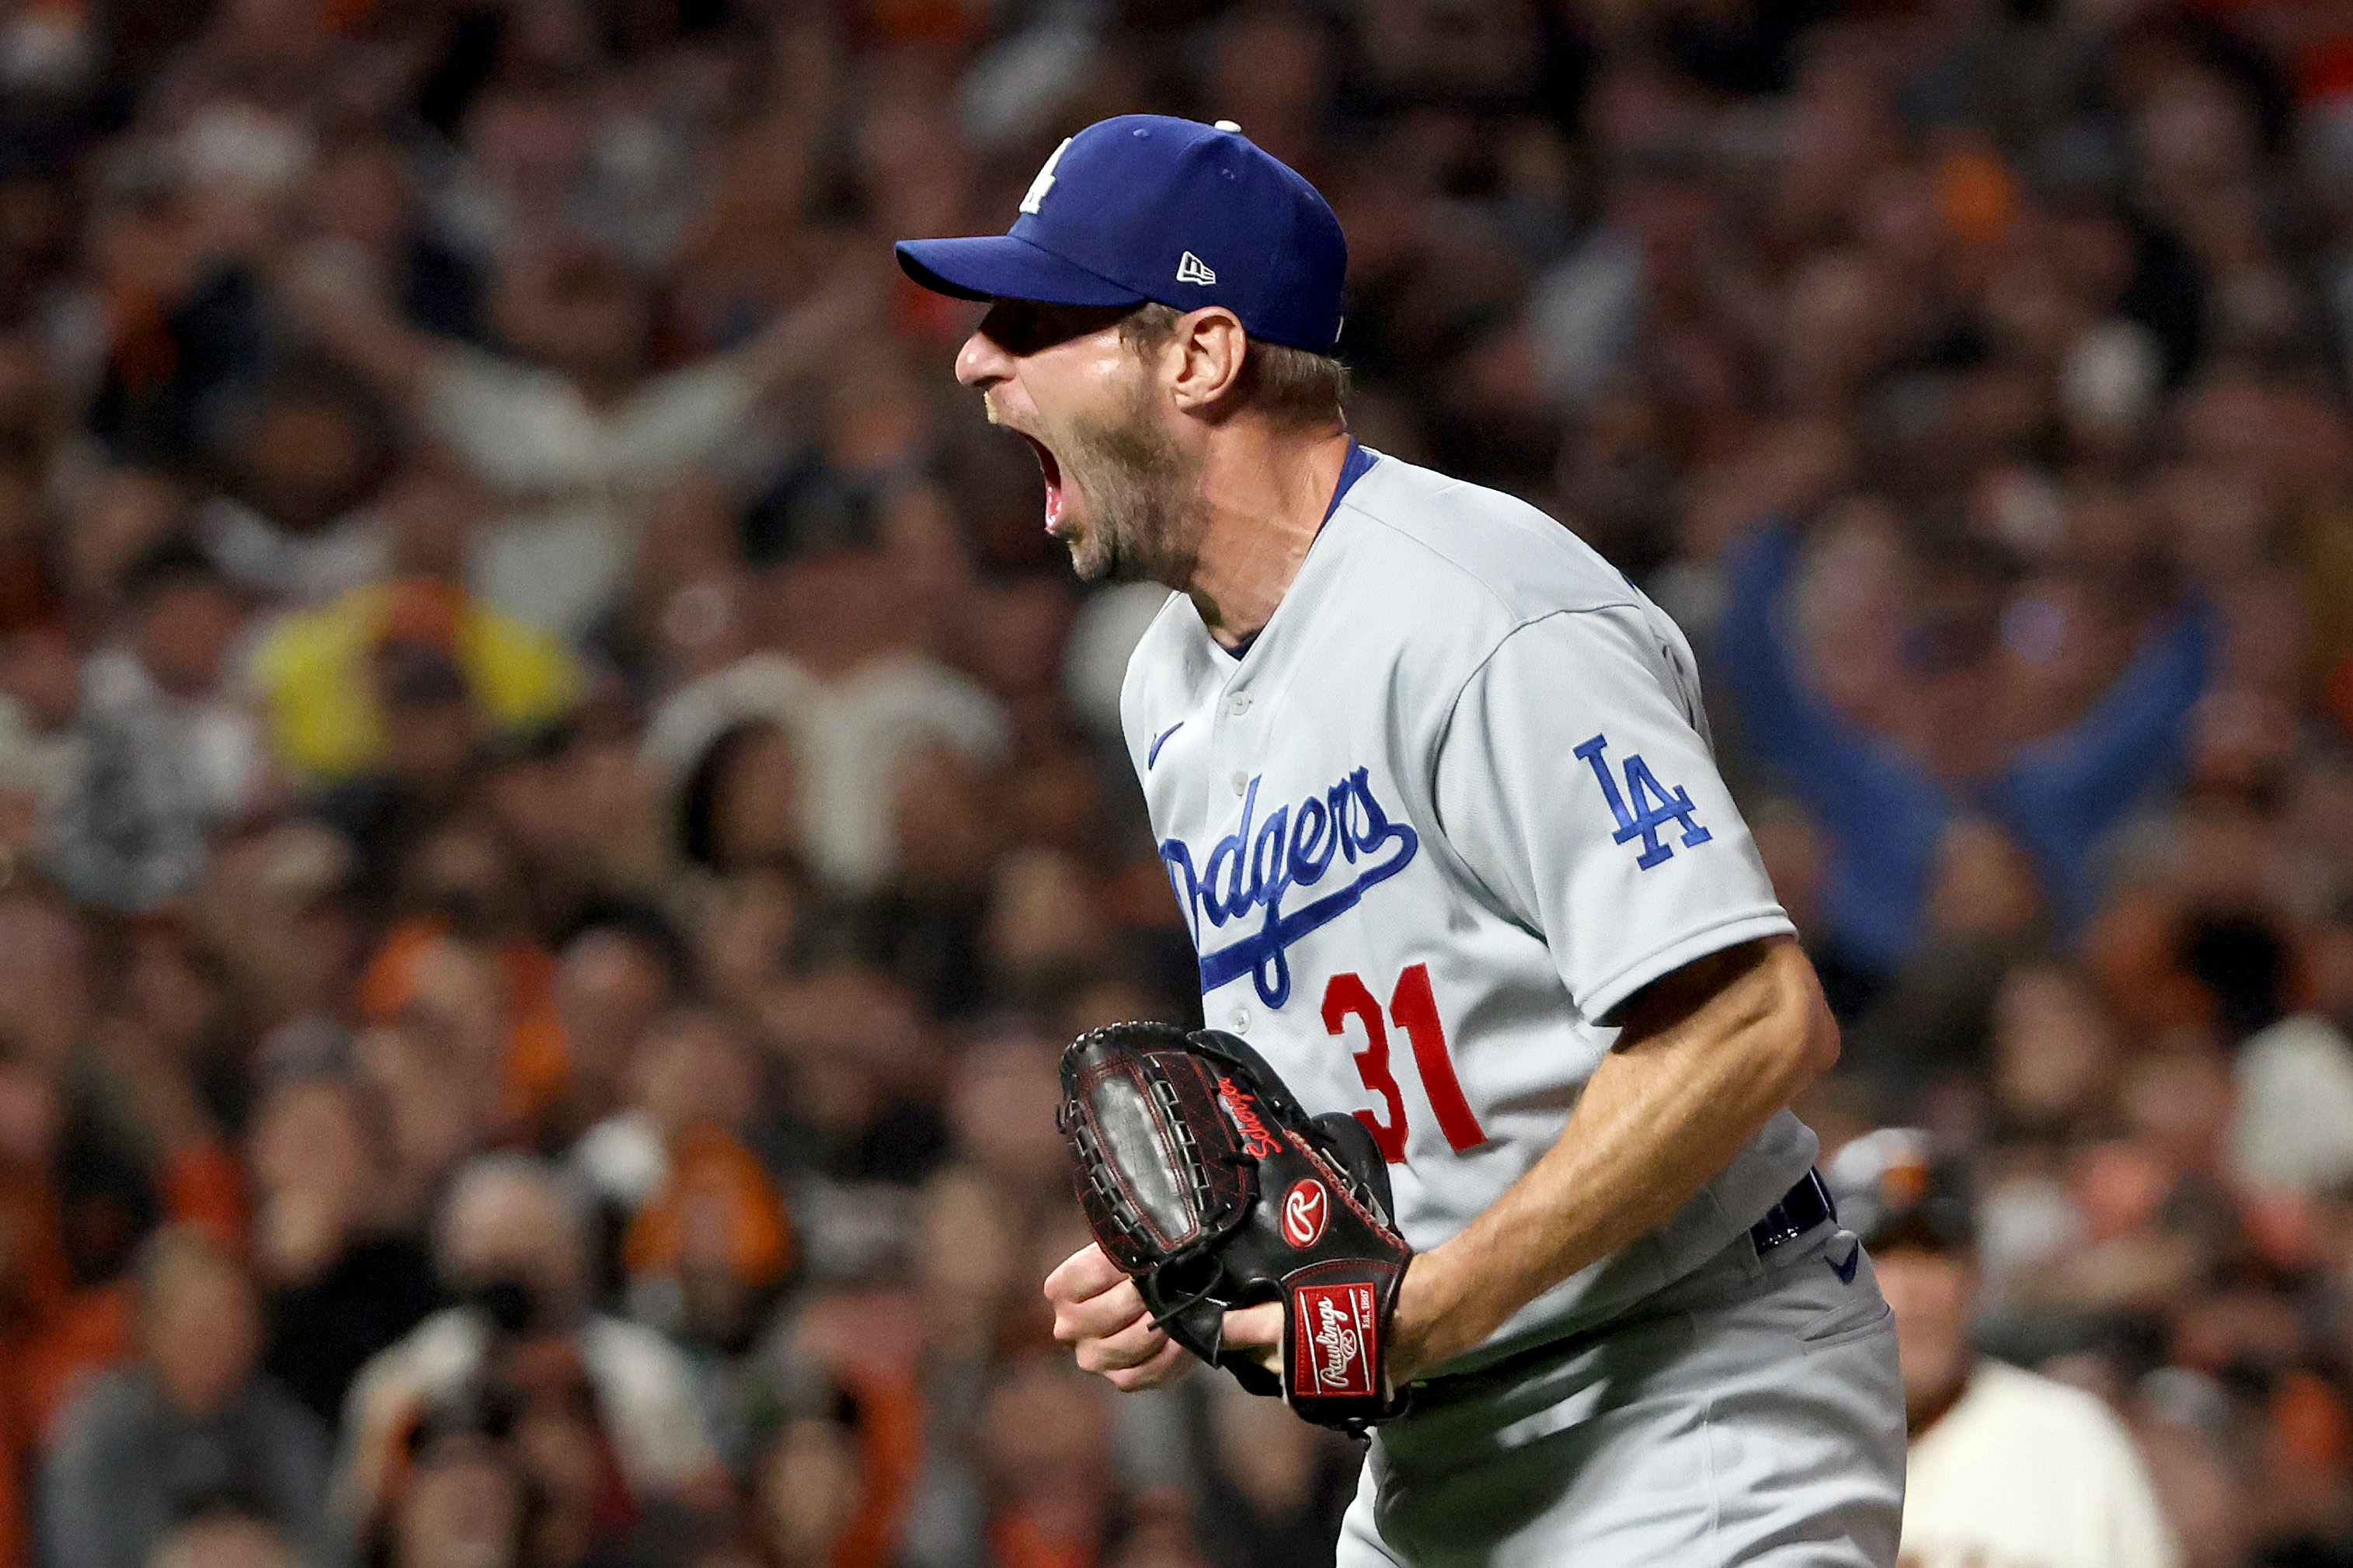 SAN FRANCISCO, CALIFORNIA - OCTOBER 14: Max Scherzer #31 of the Los Angeles Dodgers celebrates after beating the San Francisco Giants 2-1 in game 5 of the National League Division Series at Oracle Park on October 14, 2021 in San Francisco, California. (Photo by Harry How/Getty Images)